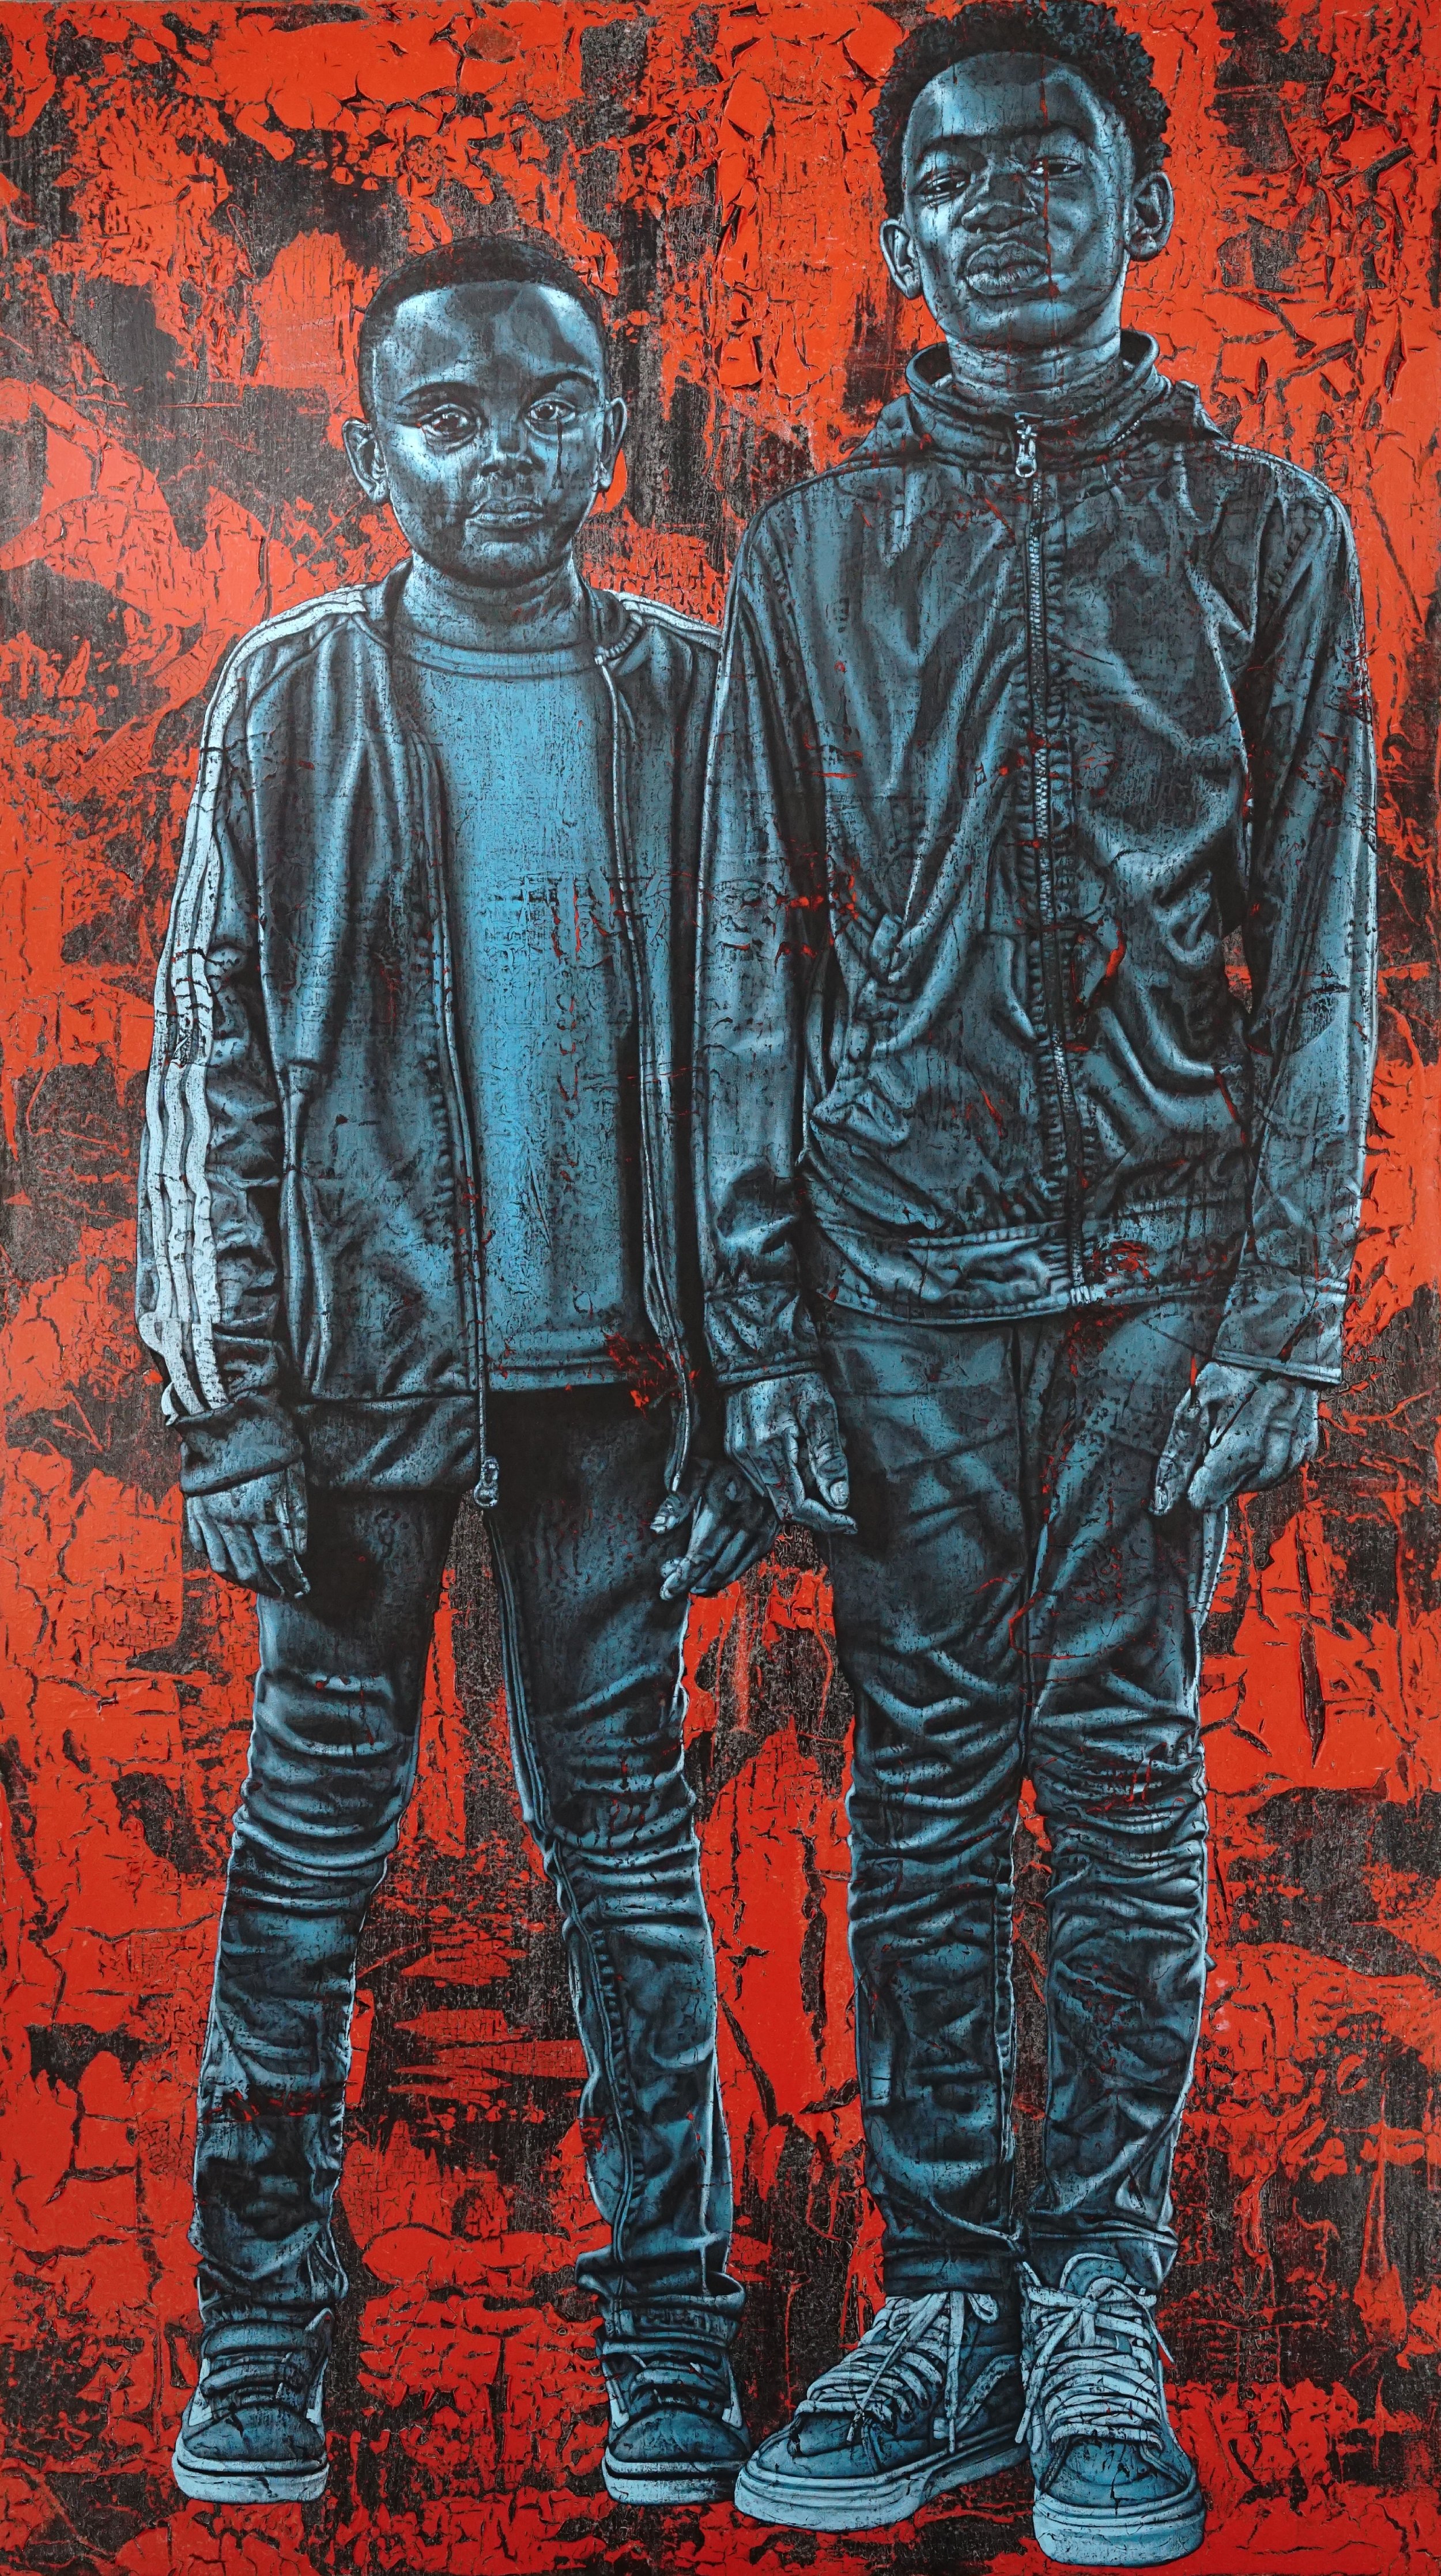  Alfred Conteh “DJ and Tay,” 2019 Acrylic on Canvas Approximately 84x32-37 inches, *MADE FOR PLUMB LINE 